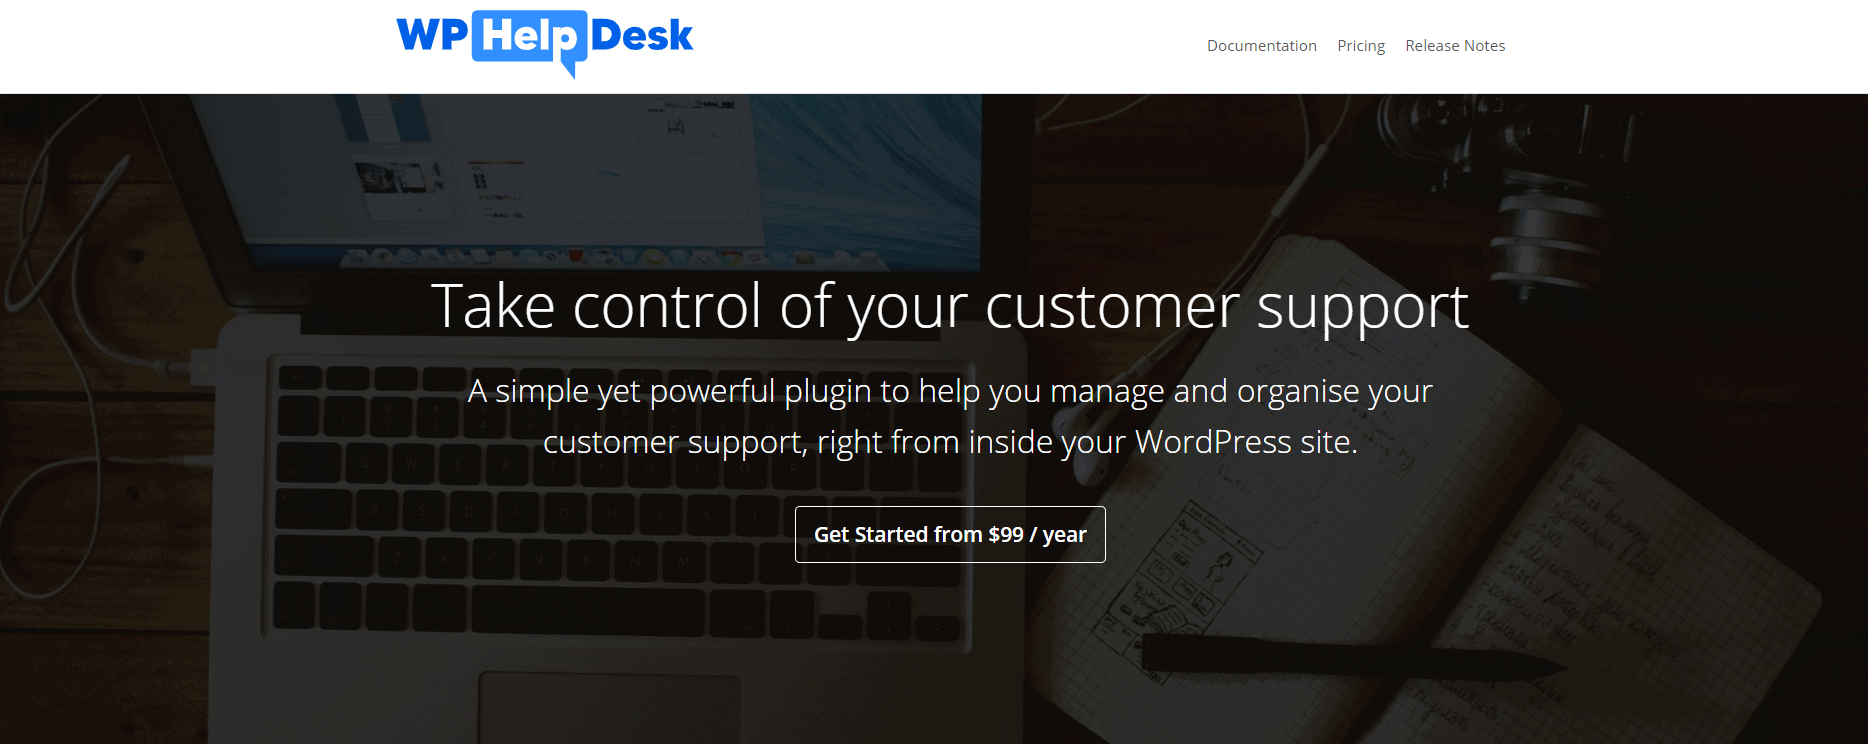 WP HelpDesk Overview